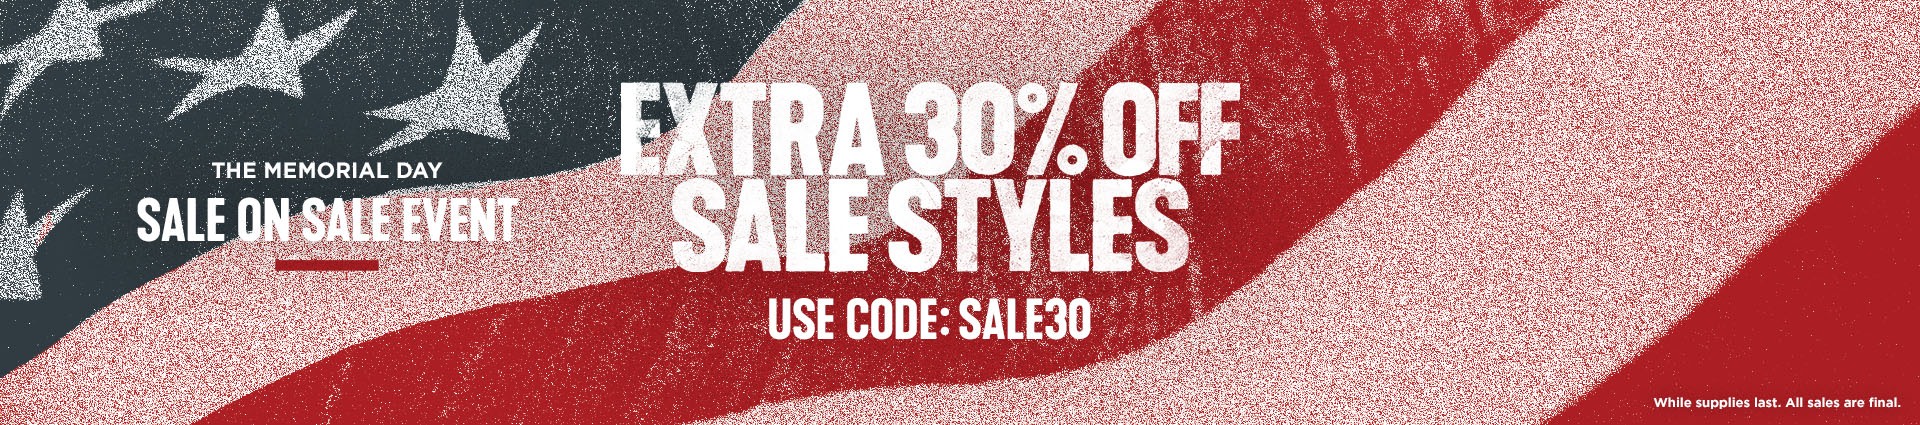 The Memorial Day Sale on Sale Event. Extra 30% off Sale Styles. Use Code SALE30